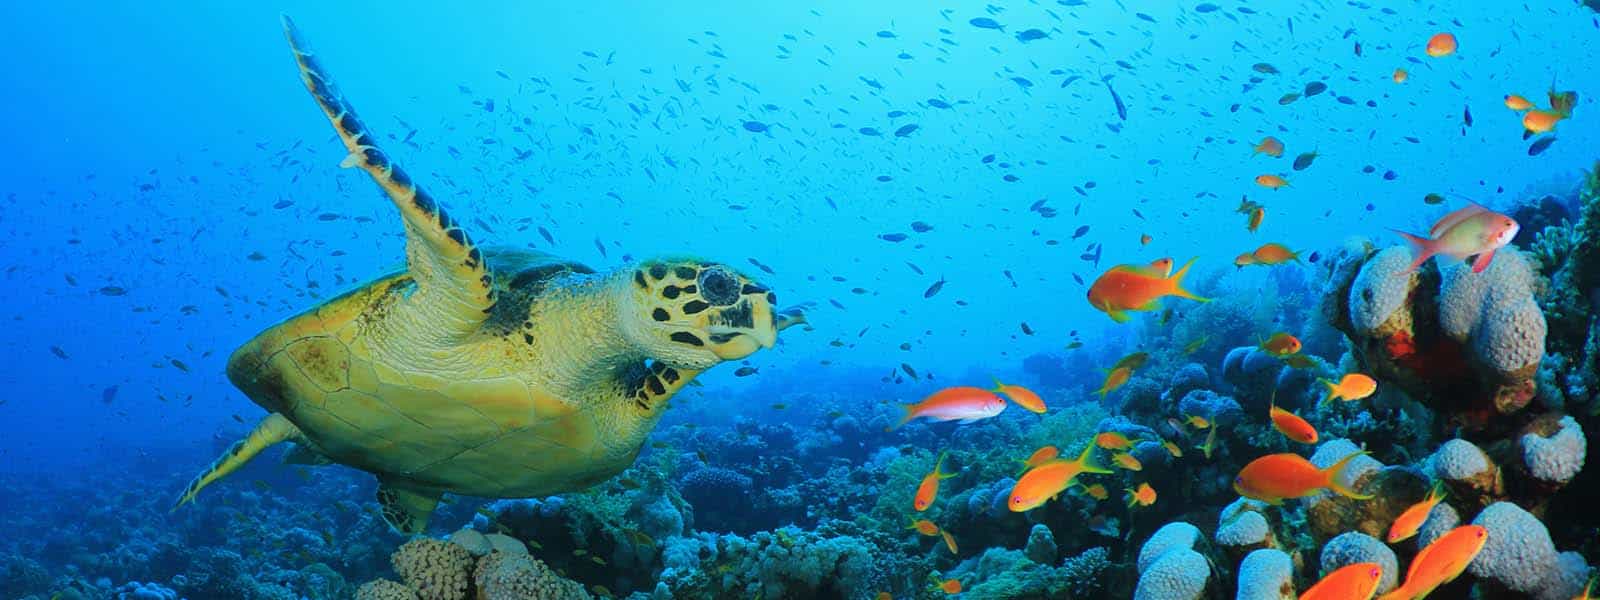 Sea Turtle swims over Coral Reef	